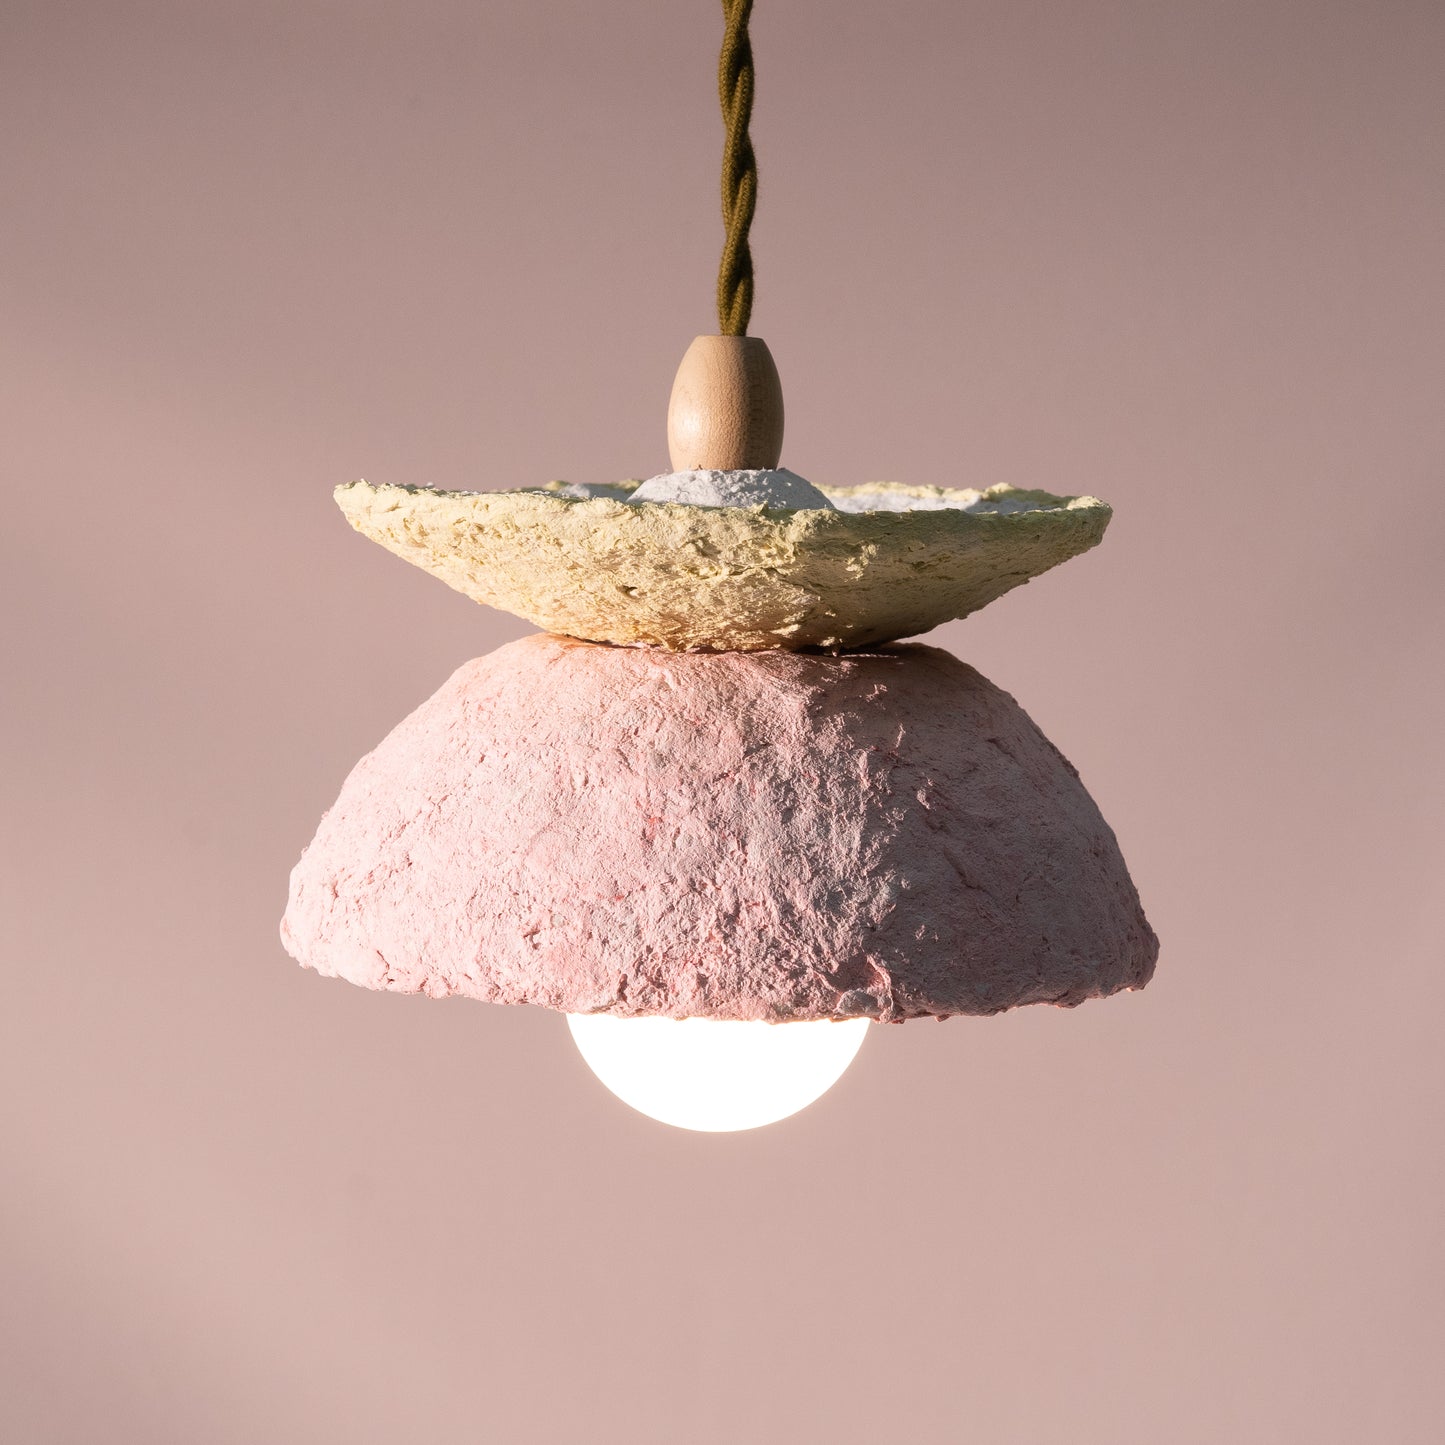 Artisan Series: "Paper Clay Pendants" (Pink) by Arielle Casale